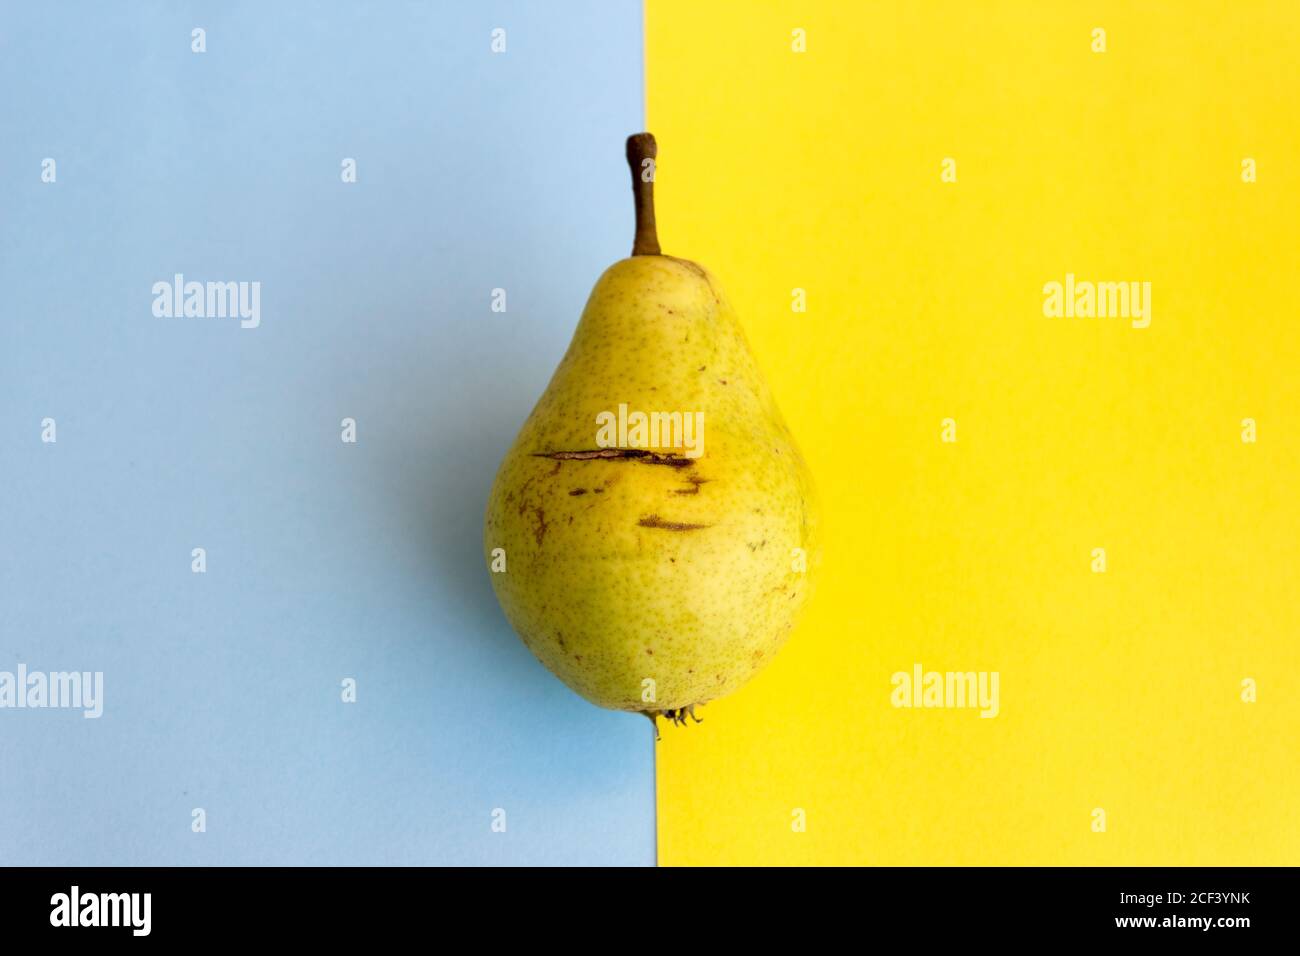 An ugly pear on a blue and yellow background, the conceptual idea is not ideality. Copy space Stock Photo